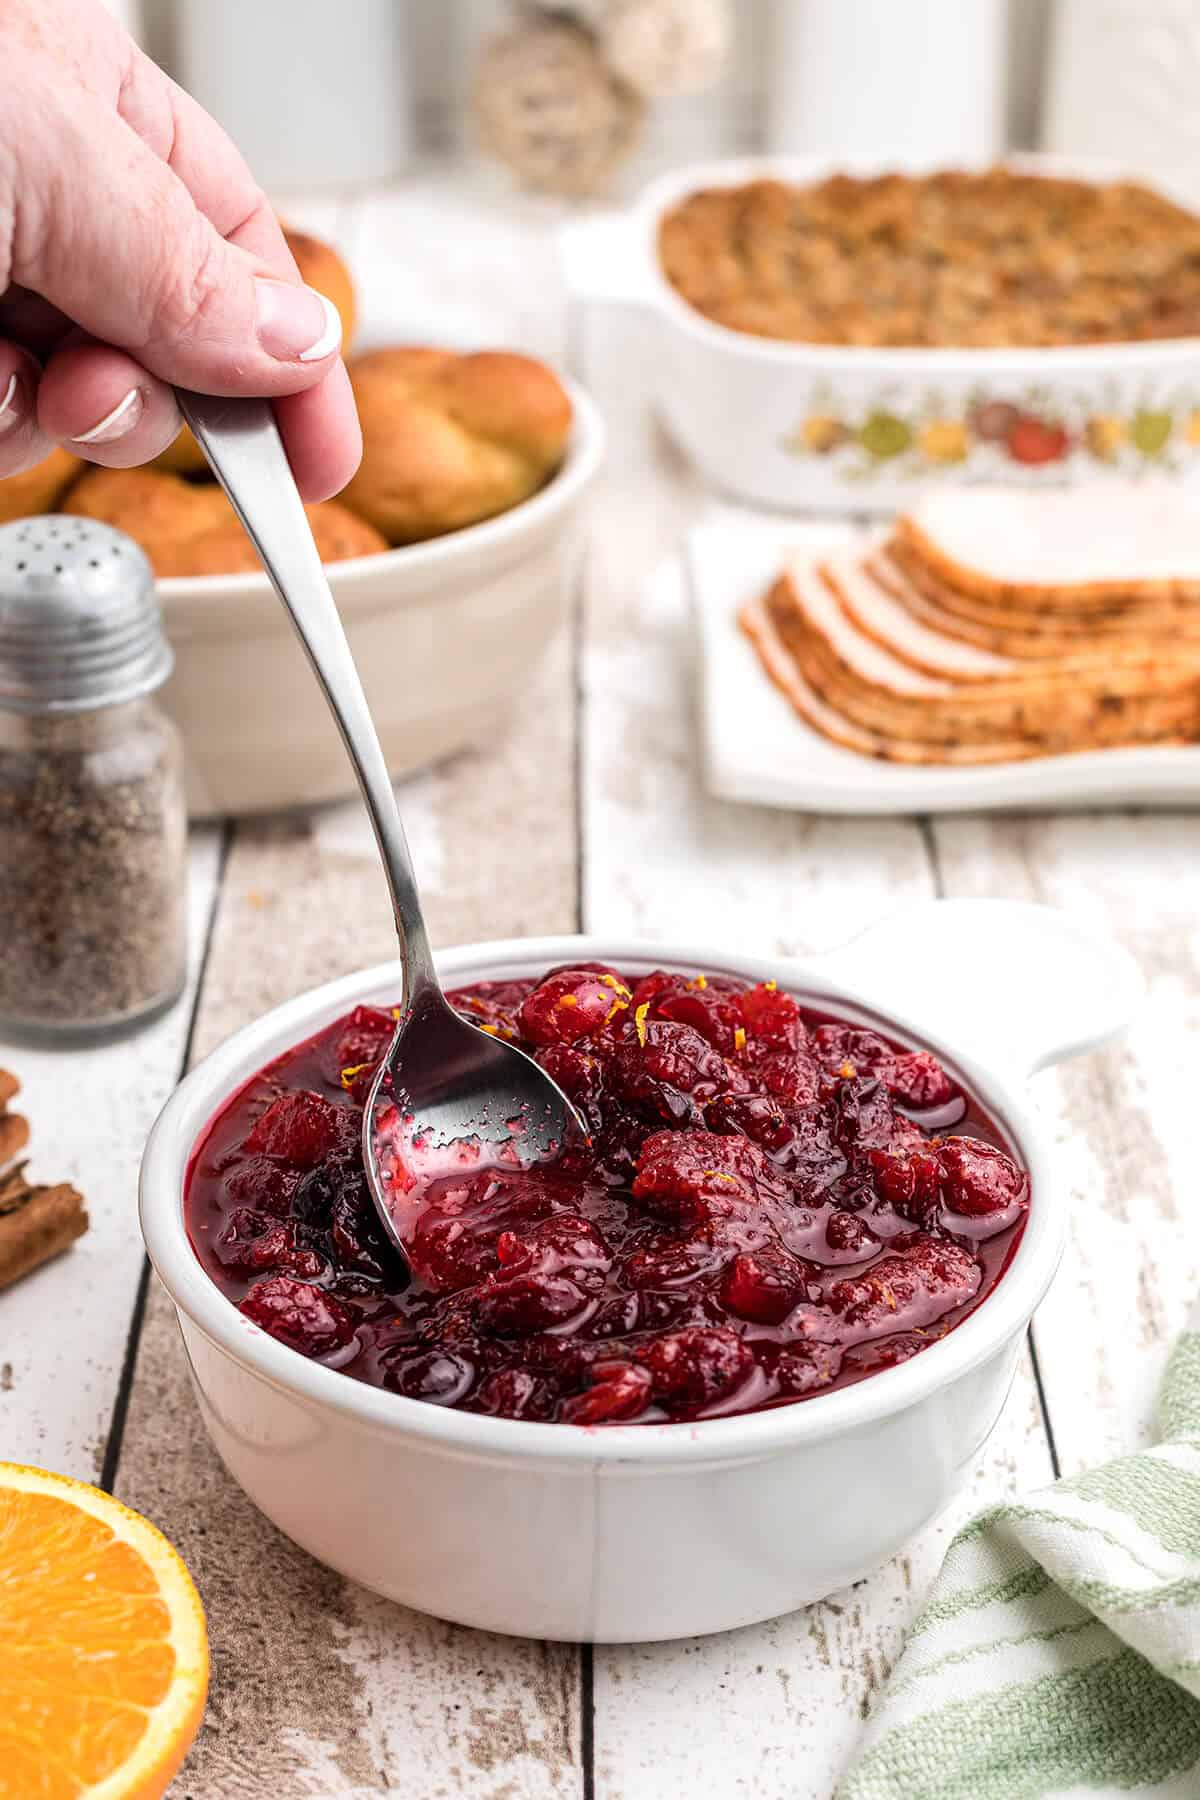 Cranberry orange sauce in a white serving dish with a spoon.